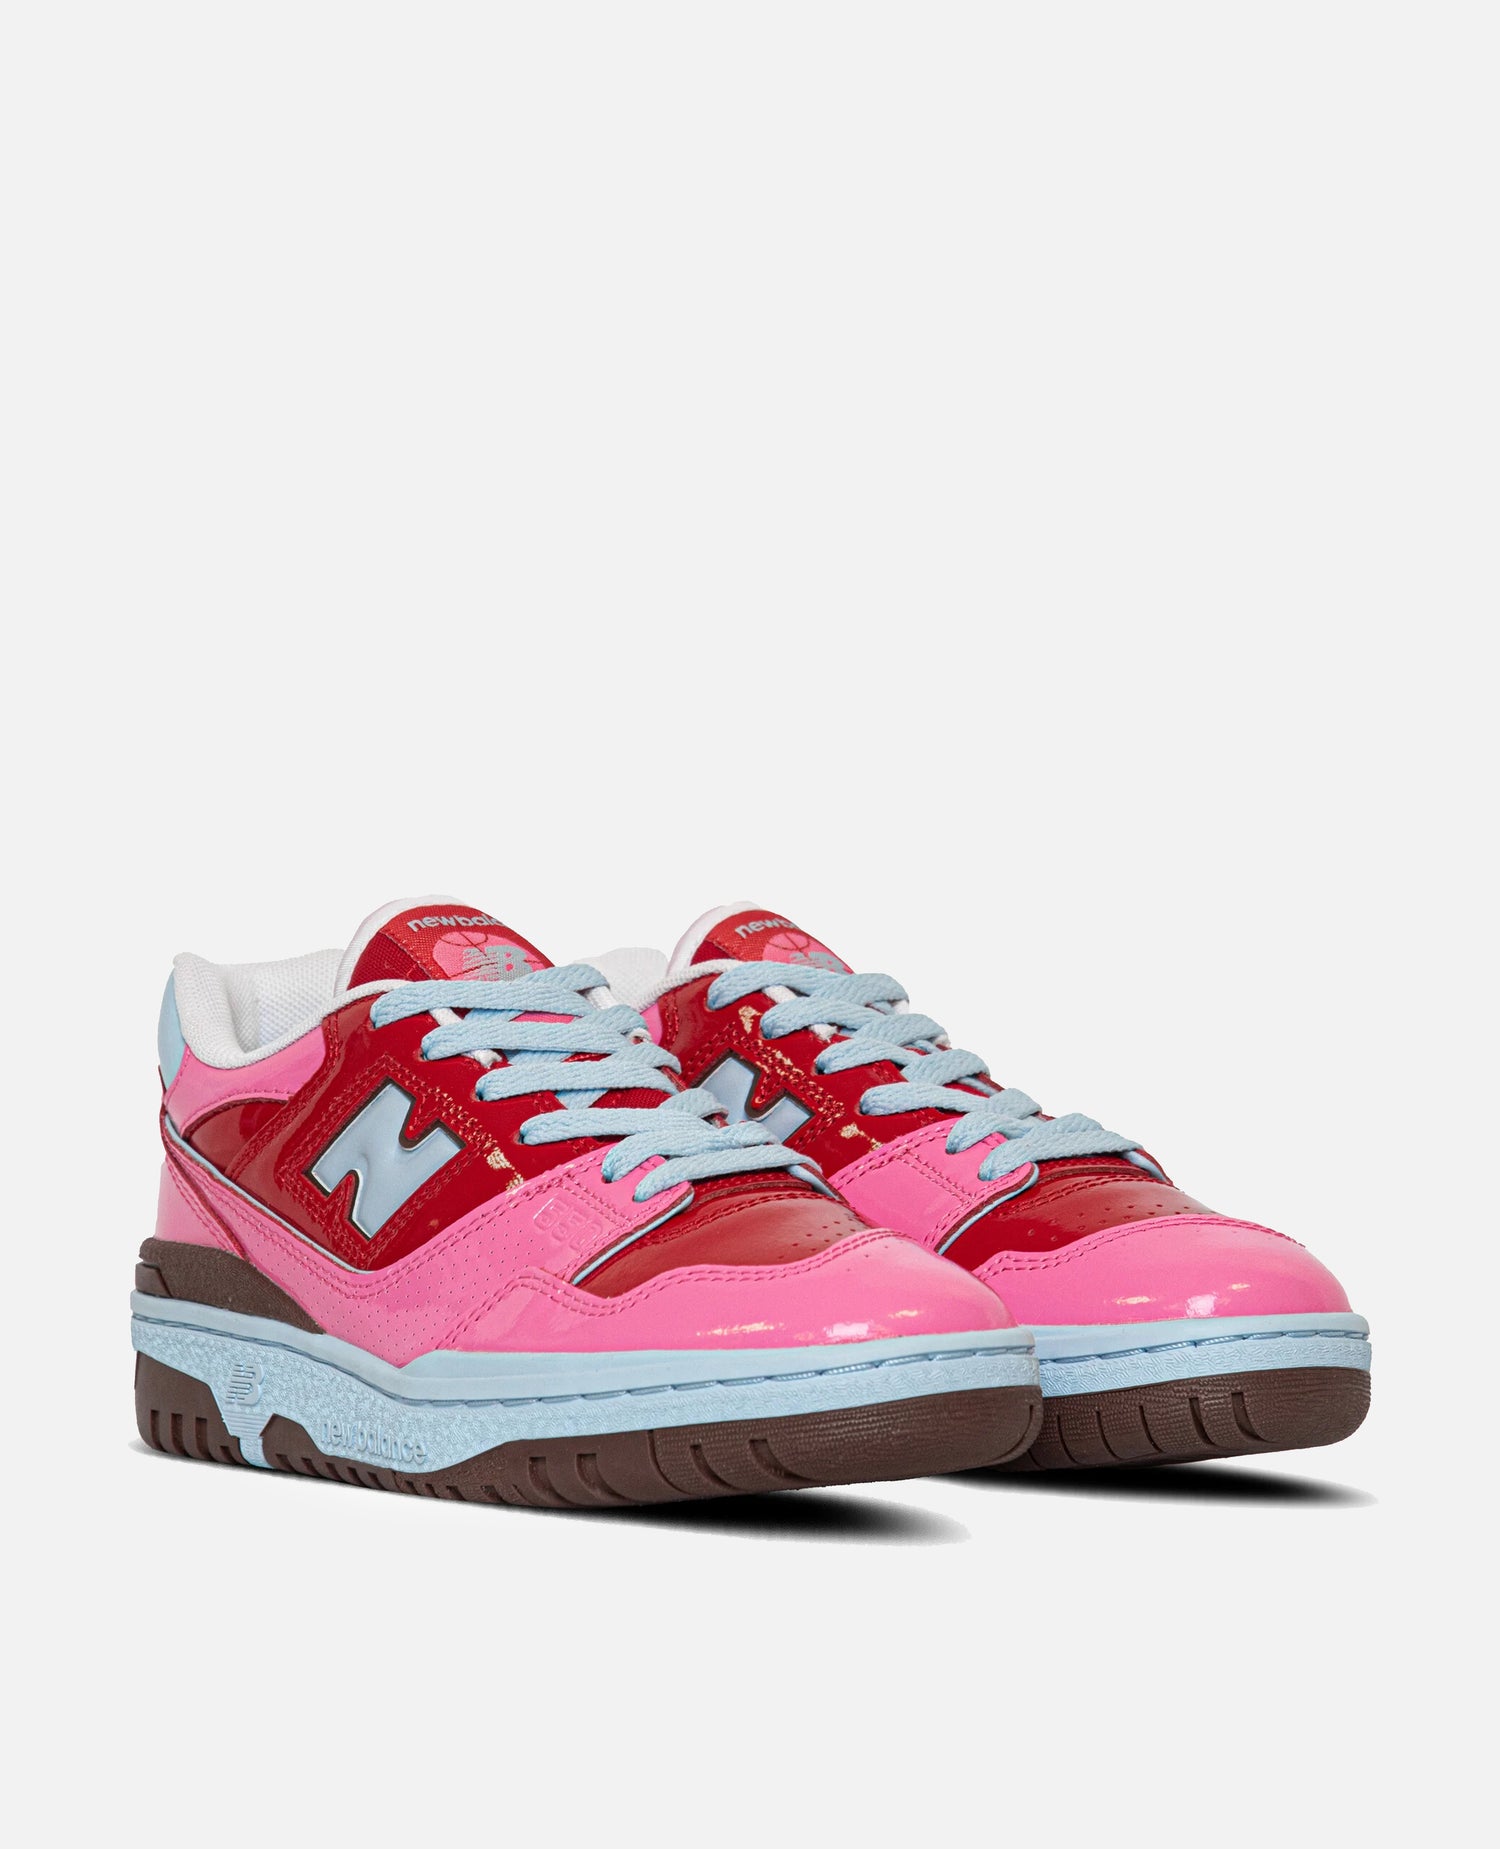 New Balance 550 (Red/Pink/Brown)